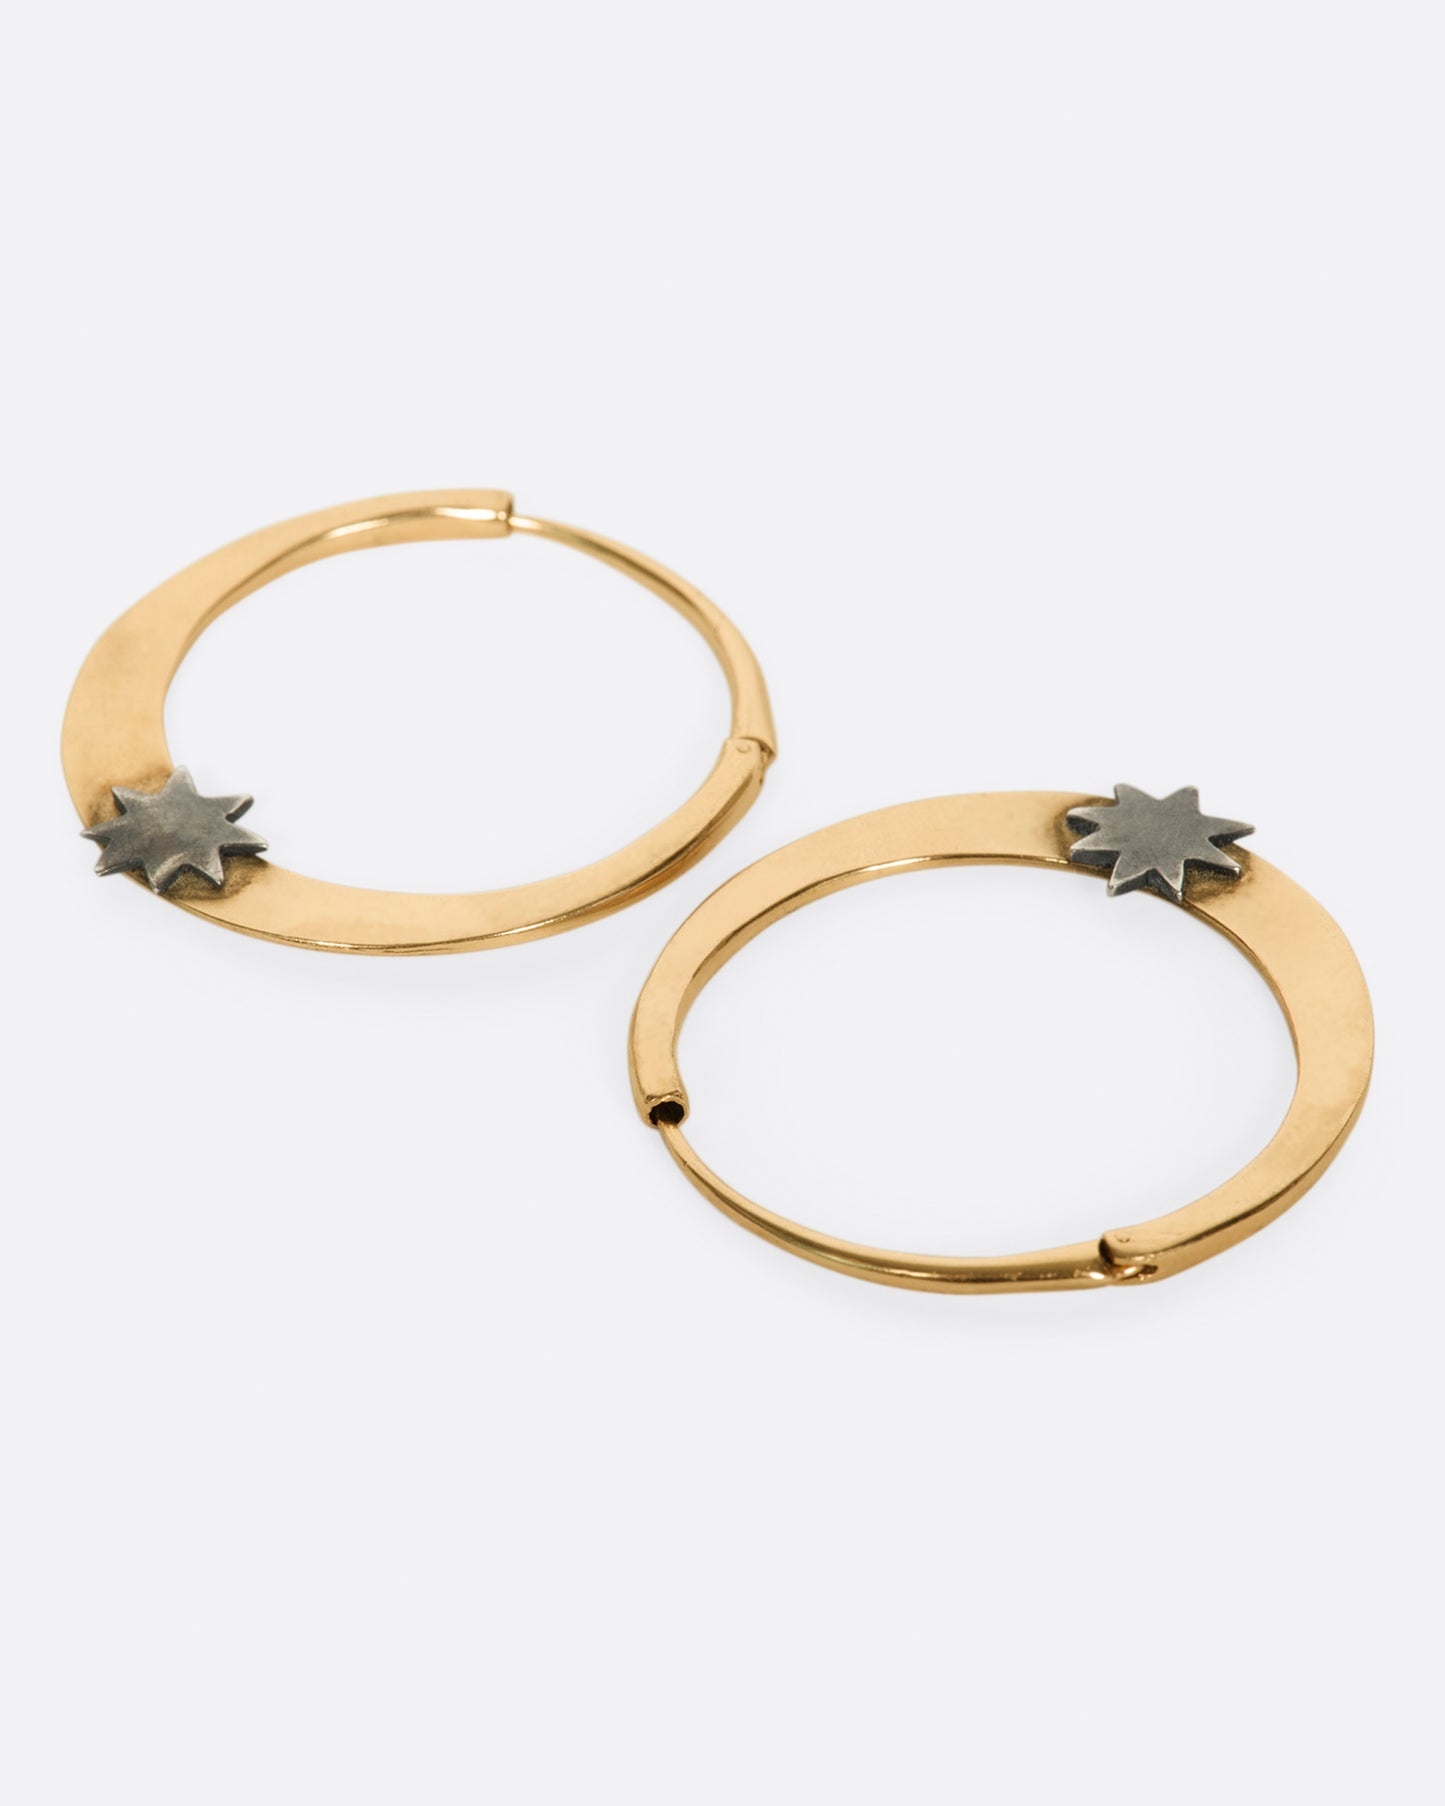 A pair of rose gold tapered hoop earrings with sterling silver stars at their base, shown laying flat.